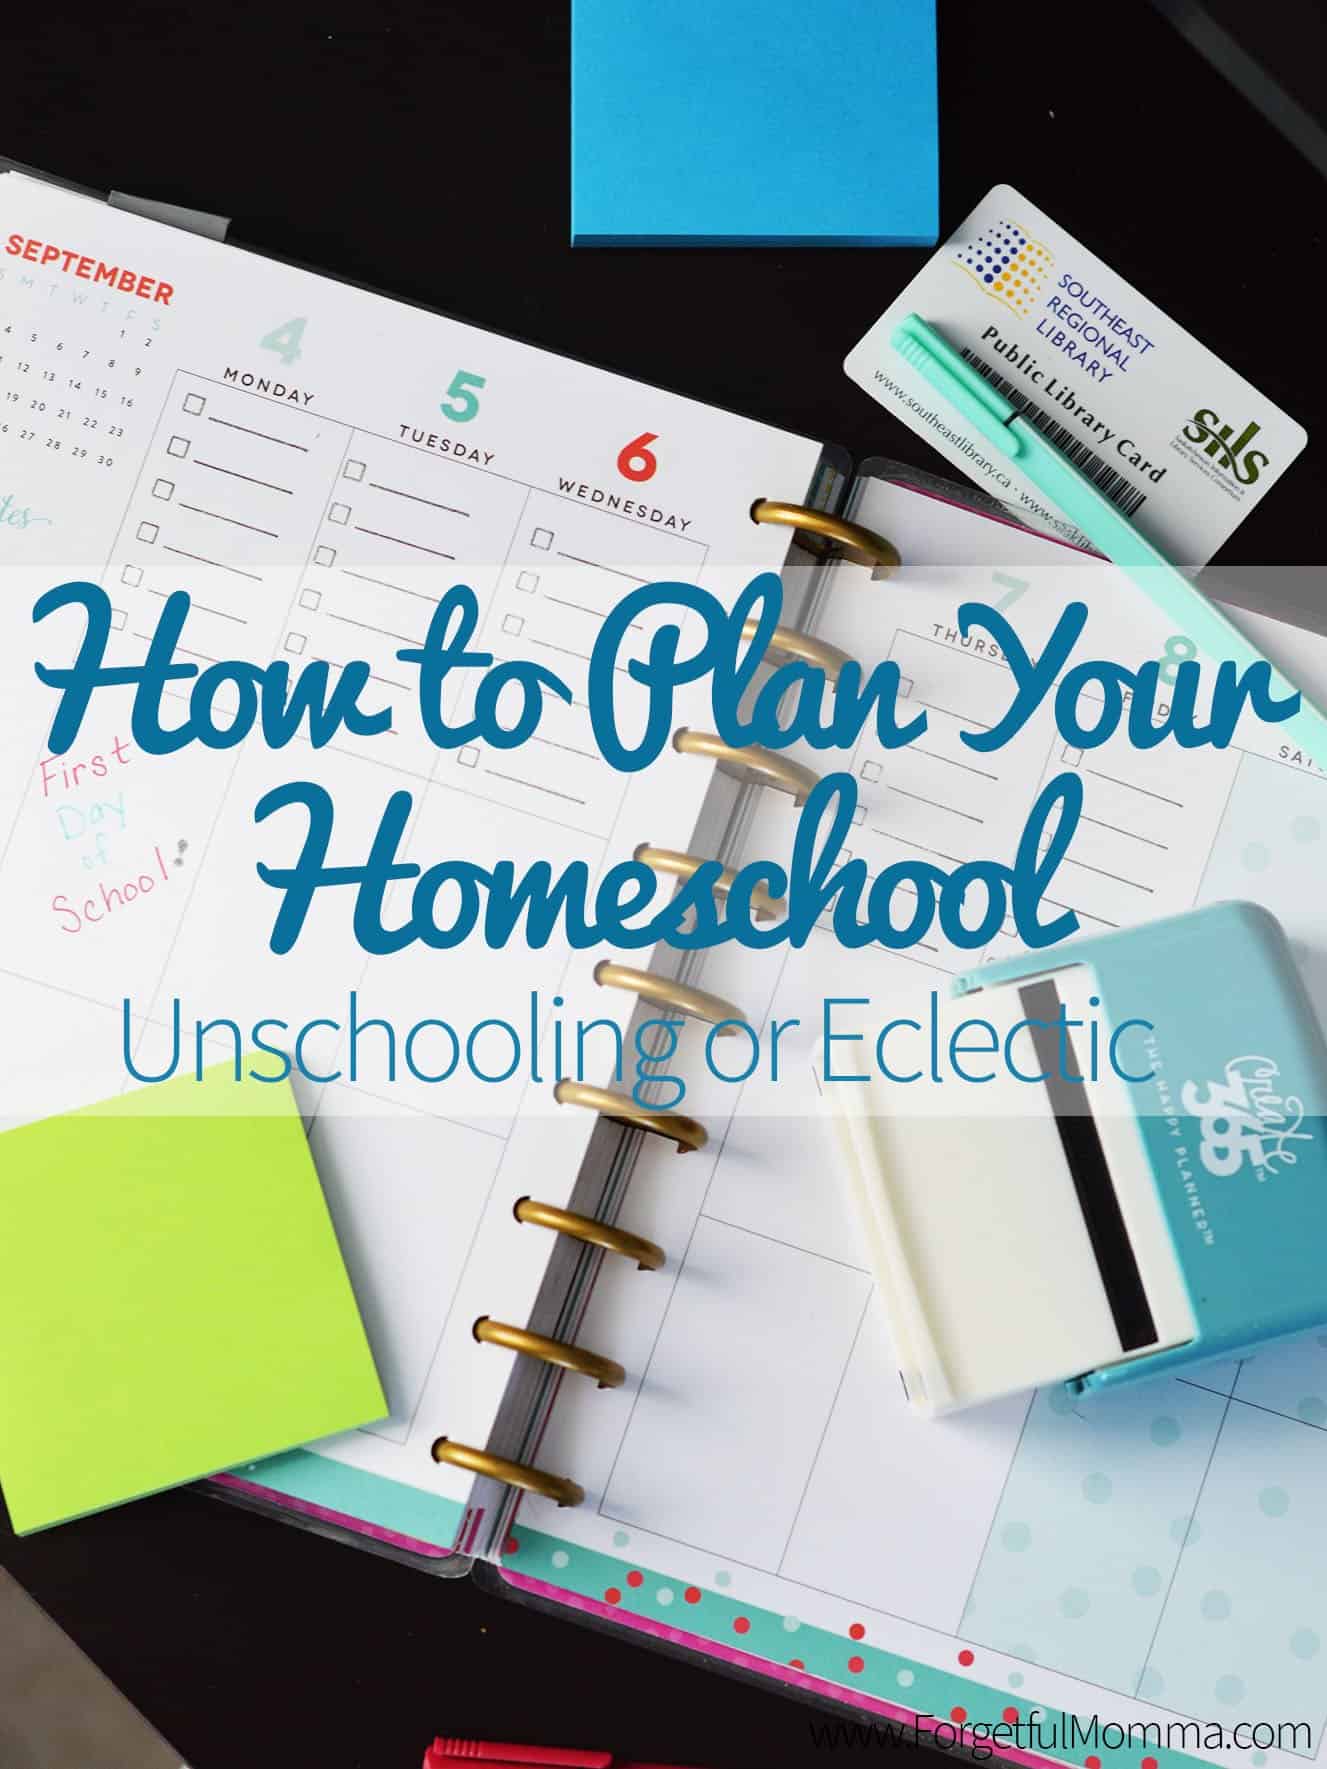 How to Plan Your Homeschool - Unschooling or Eclectic